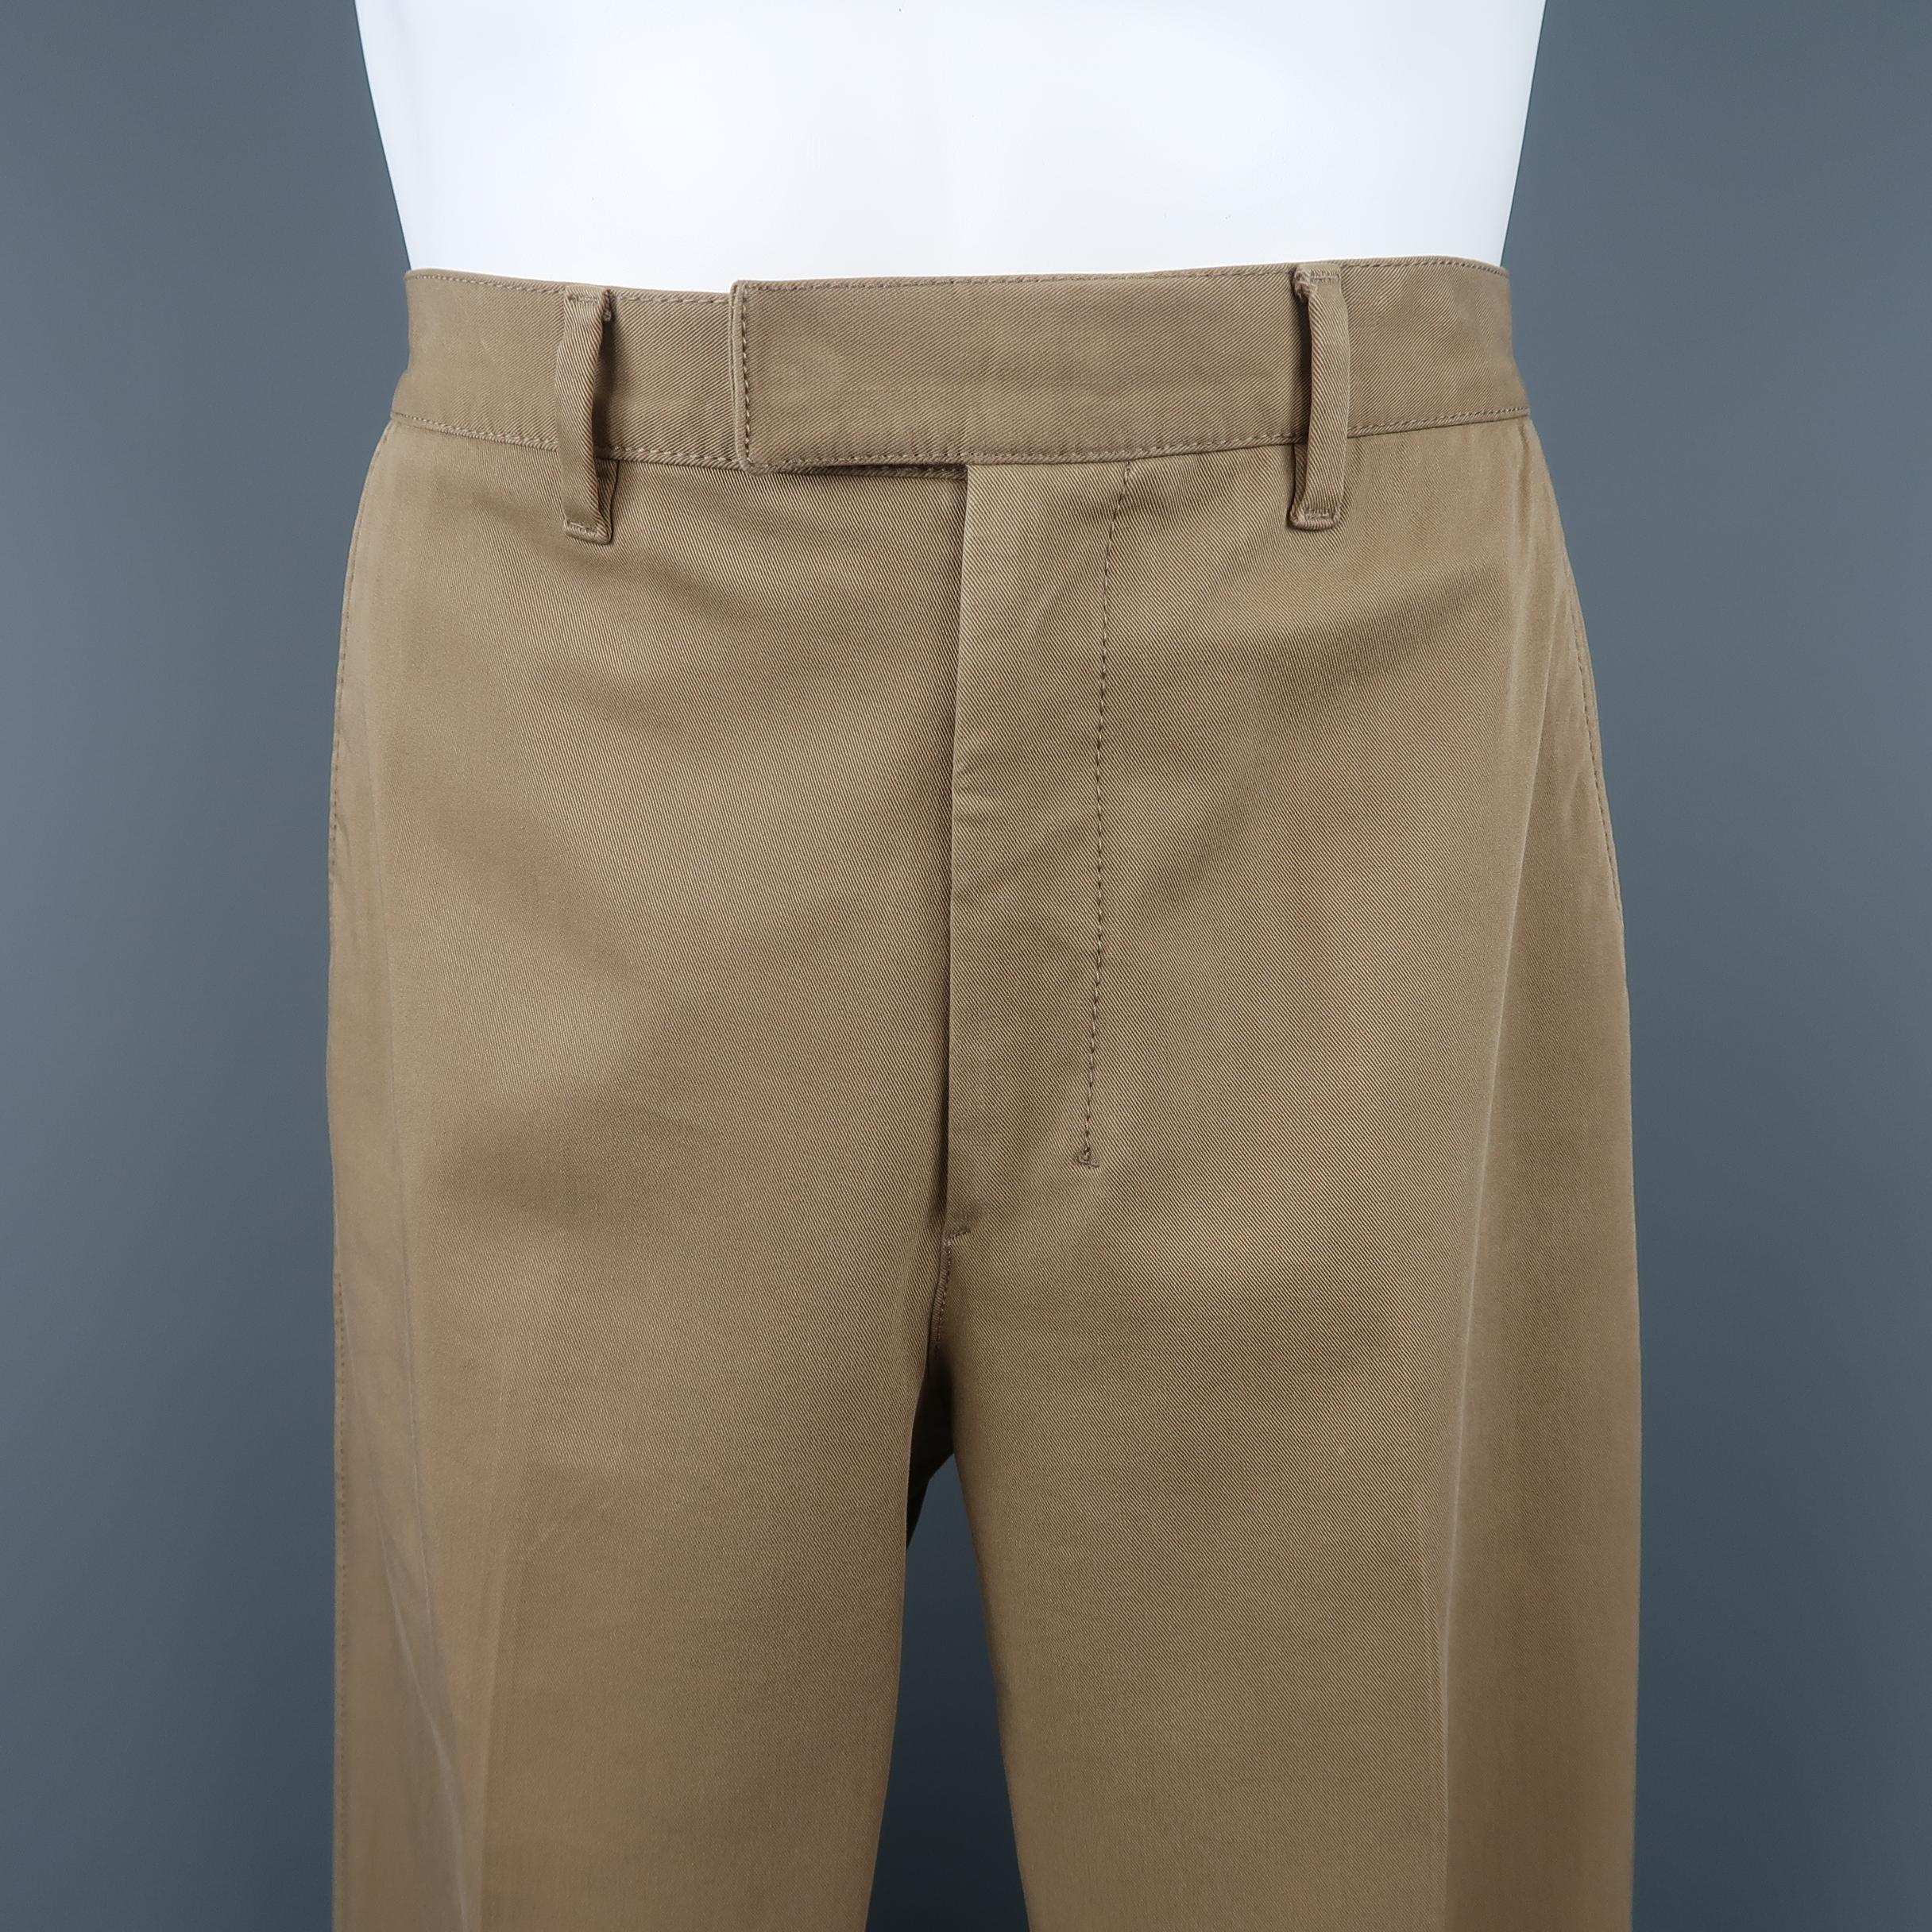 PRADA pants come in a tan beige cotton blend twill with a straight leg and covered fly closure. Made in Italy.
 
Good Pre-Owned Condition.
Marked: IT 50
 
Measurements:
 
Waist: 32 in.
Rise: 11.5 in.
Inseam:  30 in.